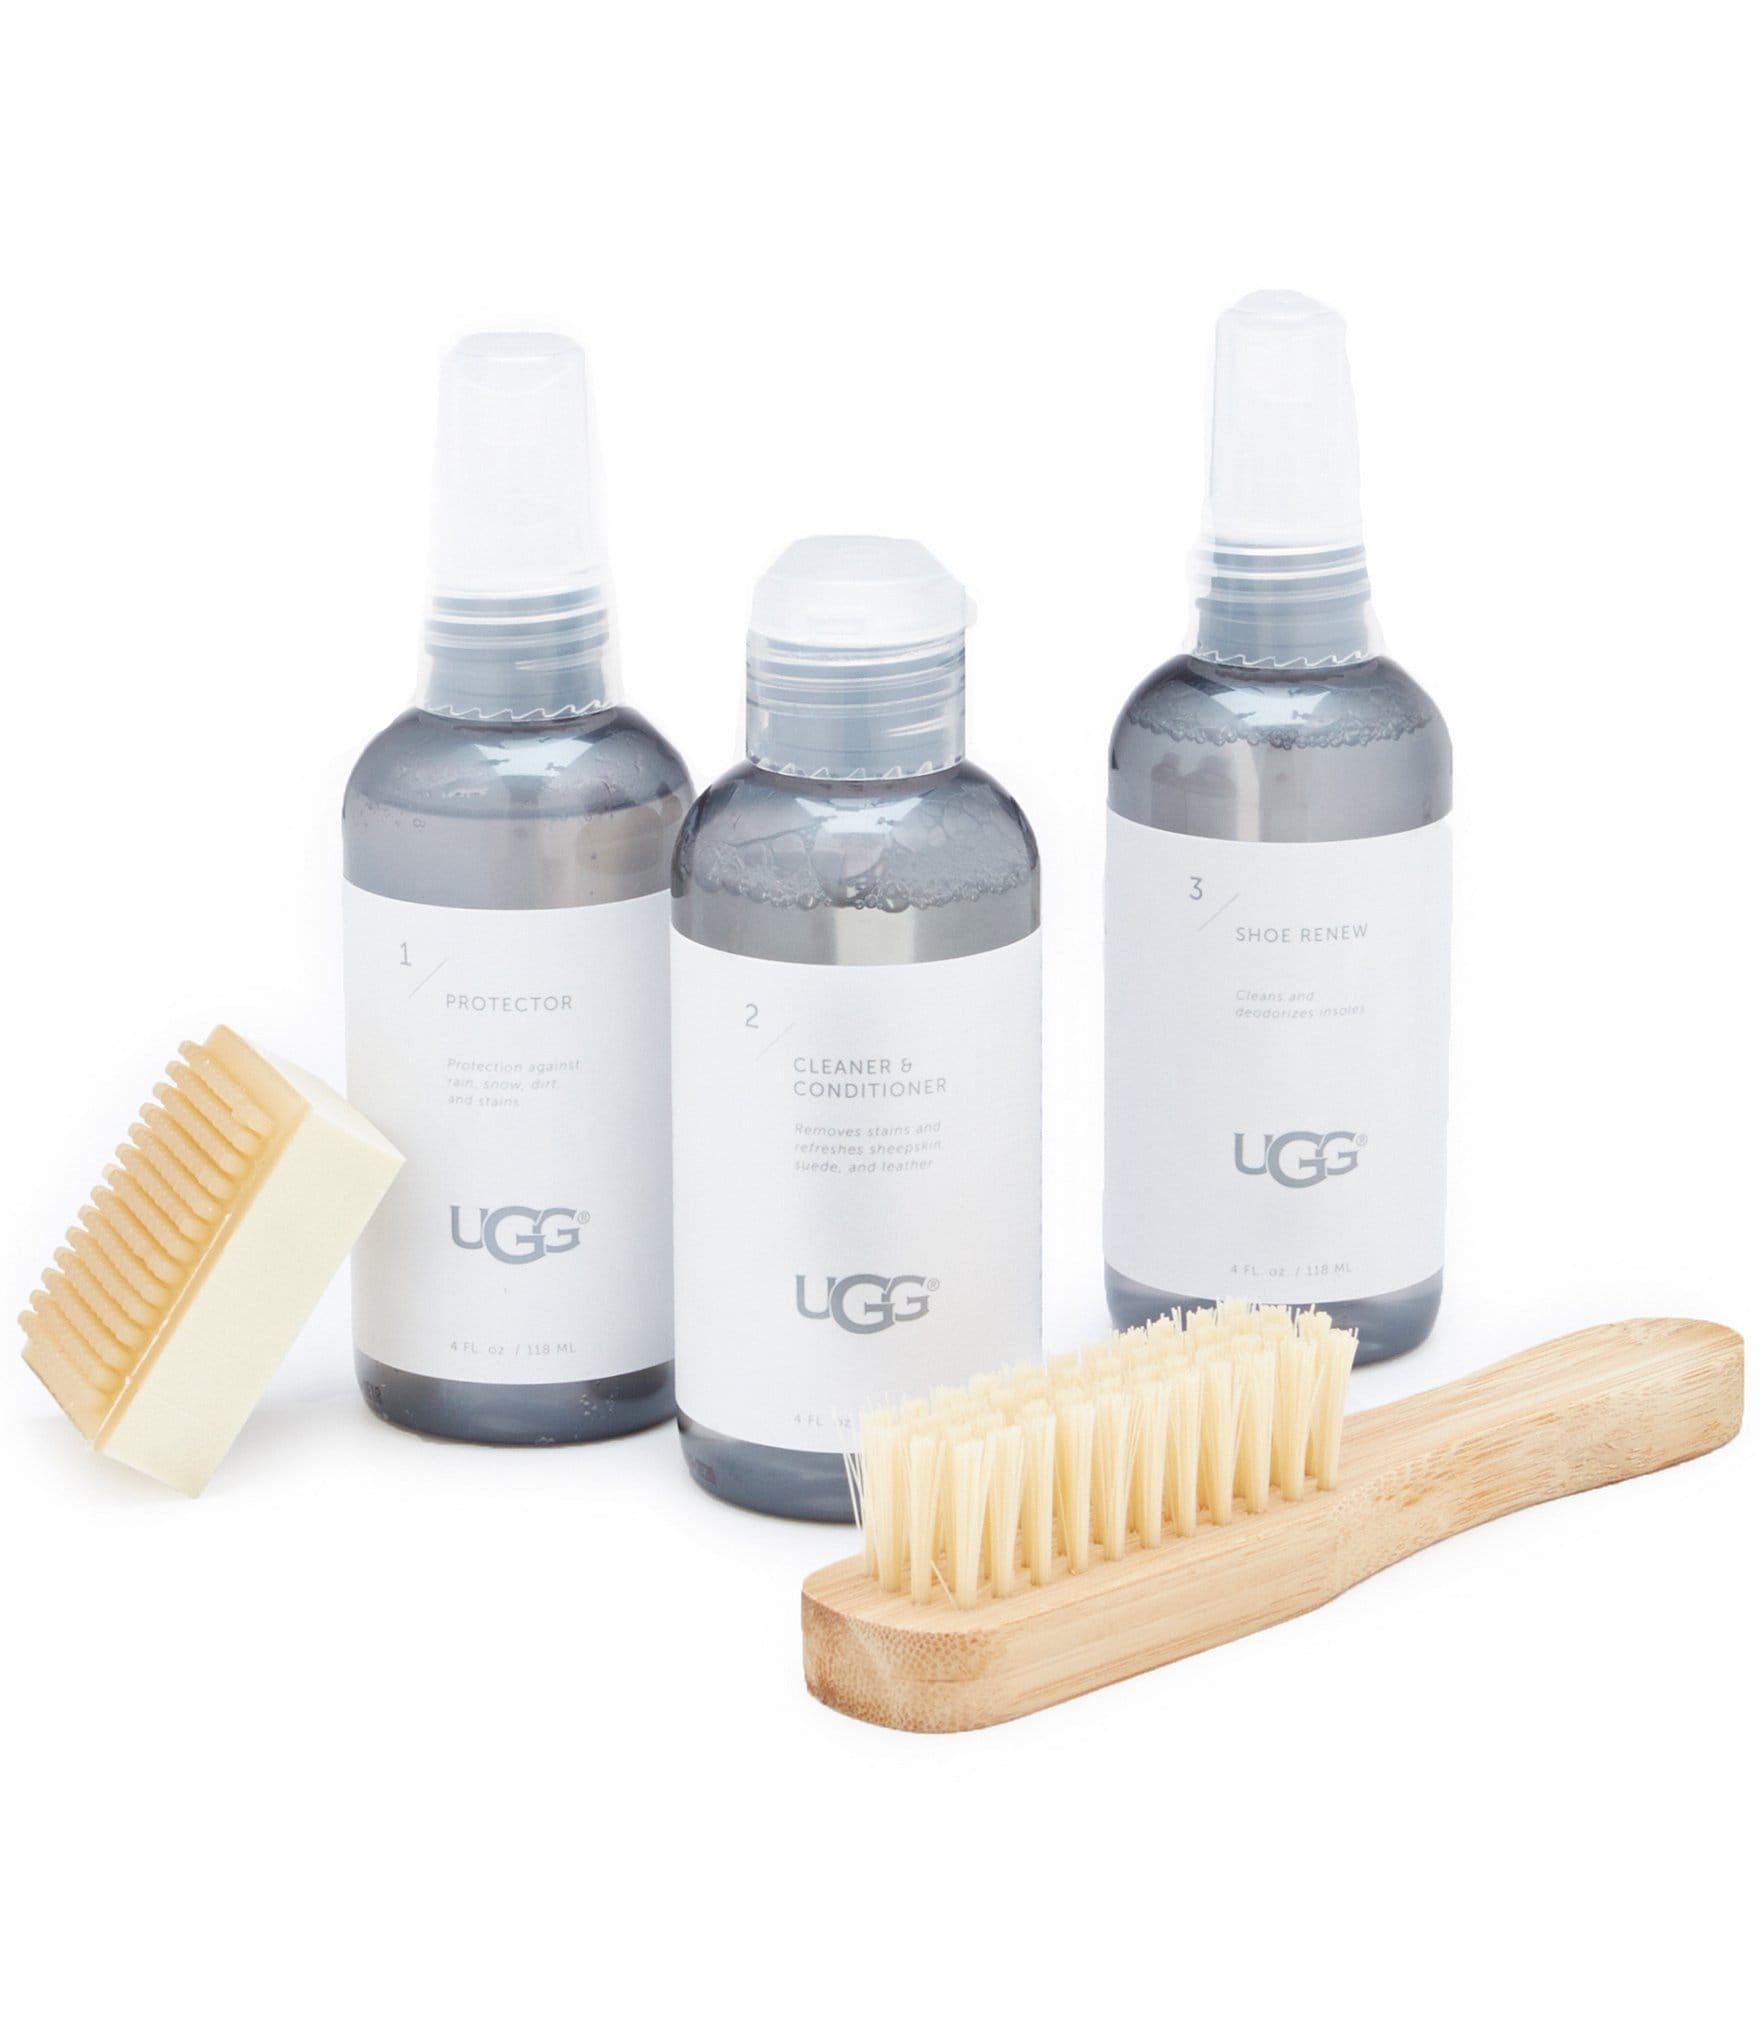 ugg water resistant spray